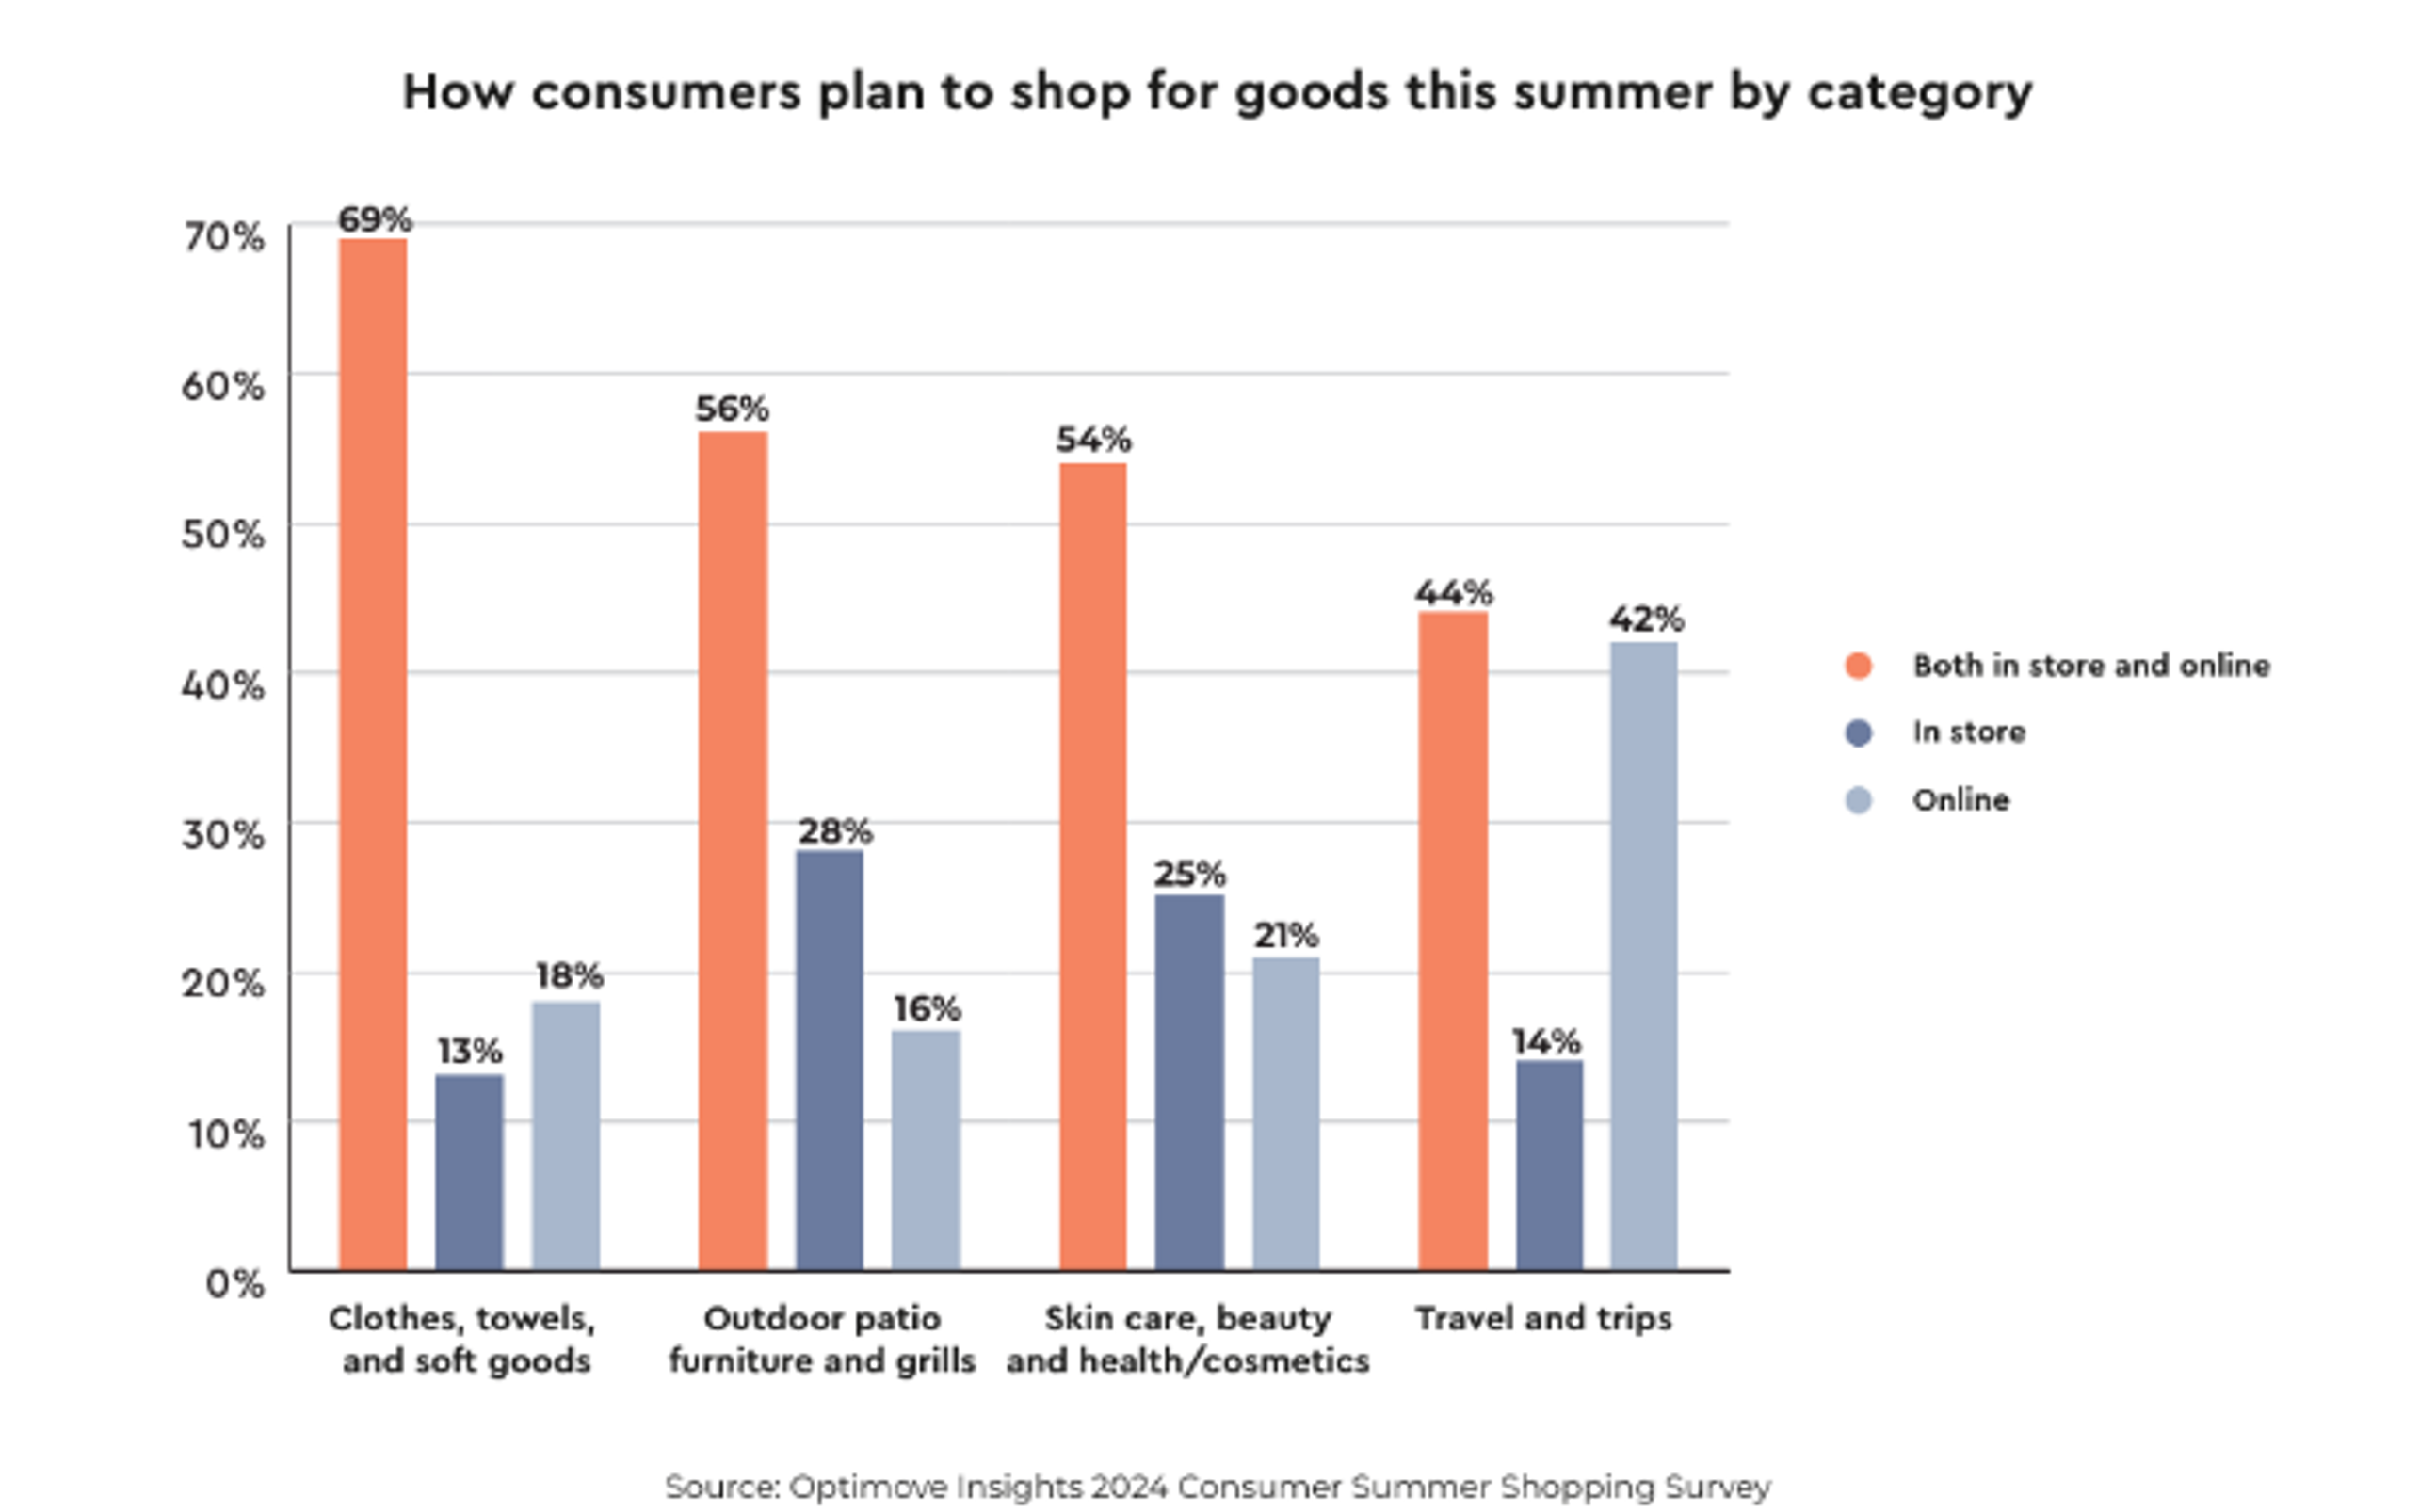 Research Online, Purchase In-Store (ROPIS) Confirmed as the Standard for Shopping Behaviors 